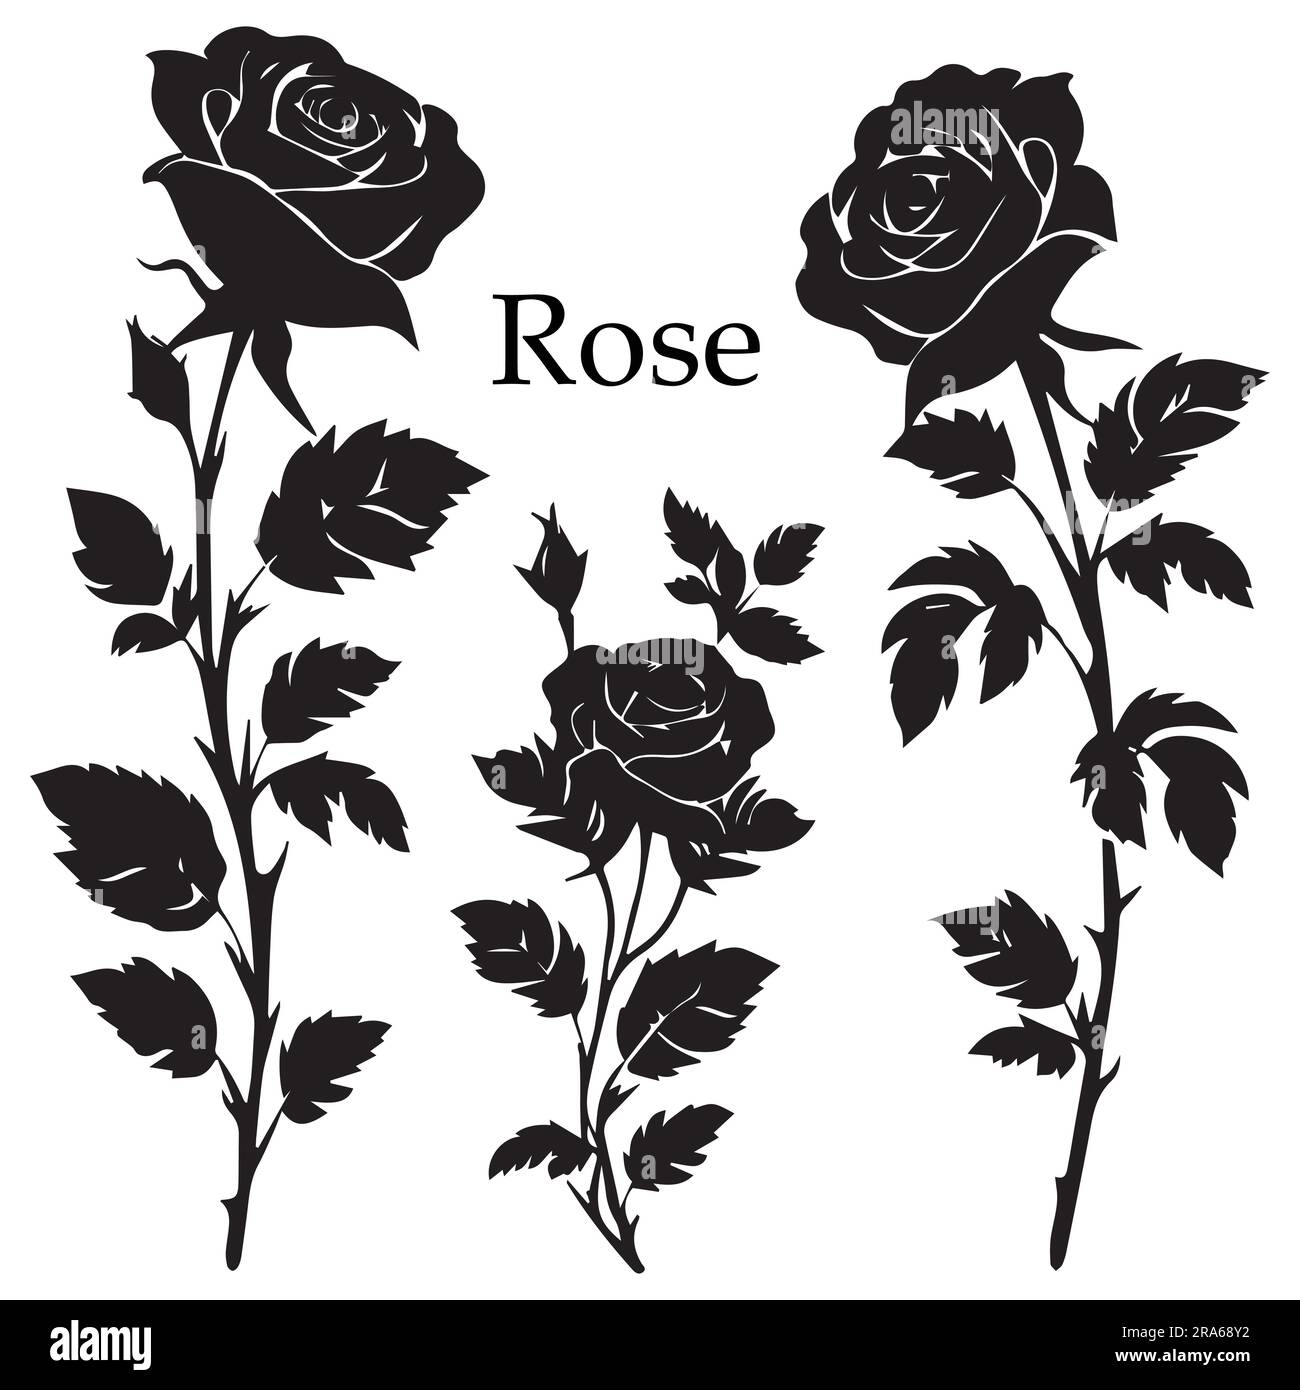 A set of silhouette rose vector illustration Stock Vector